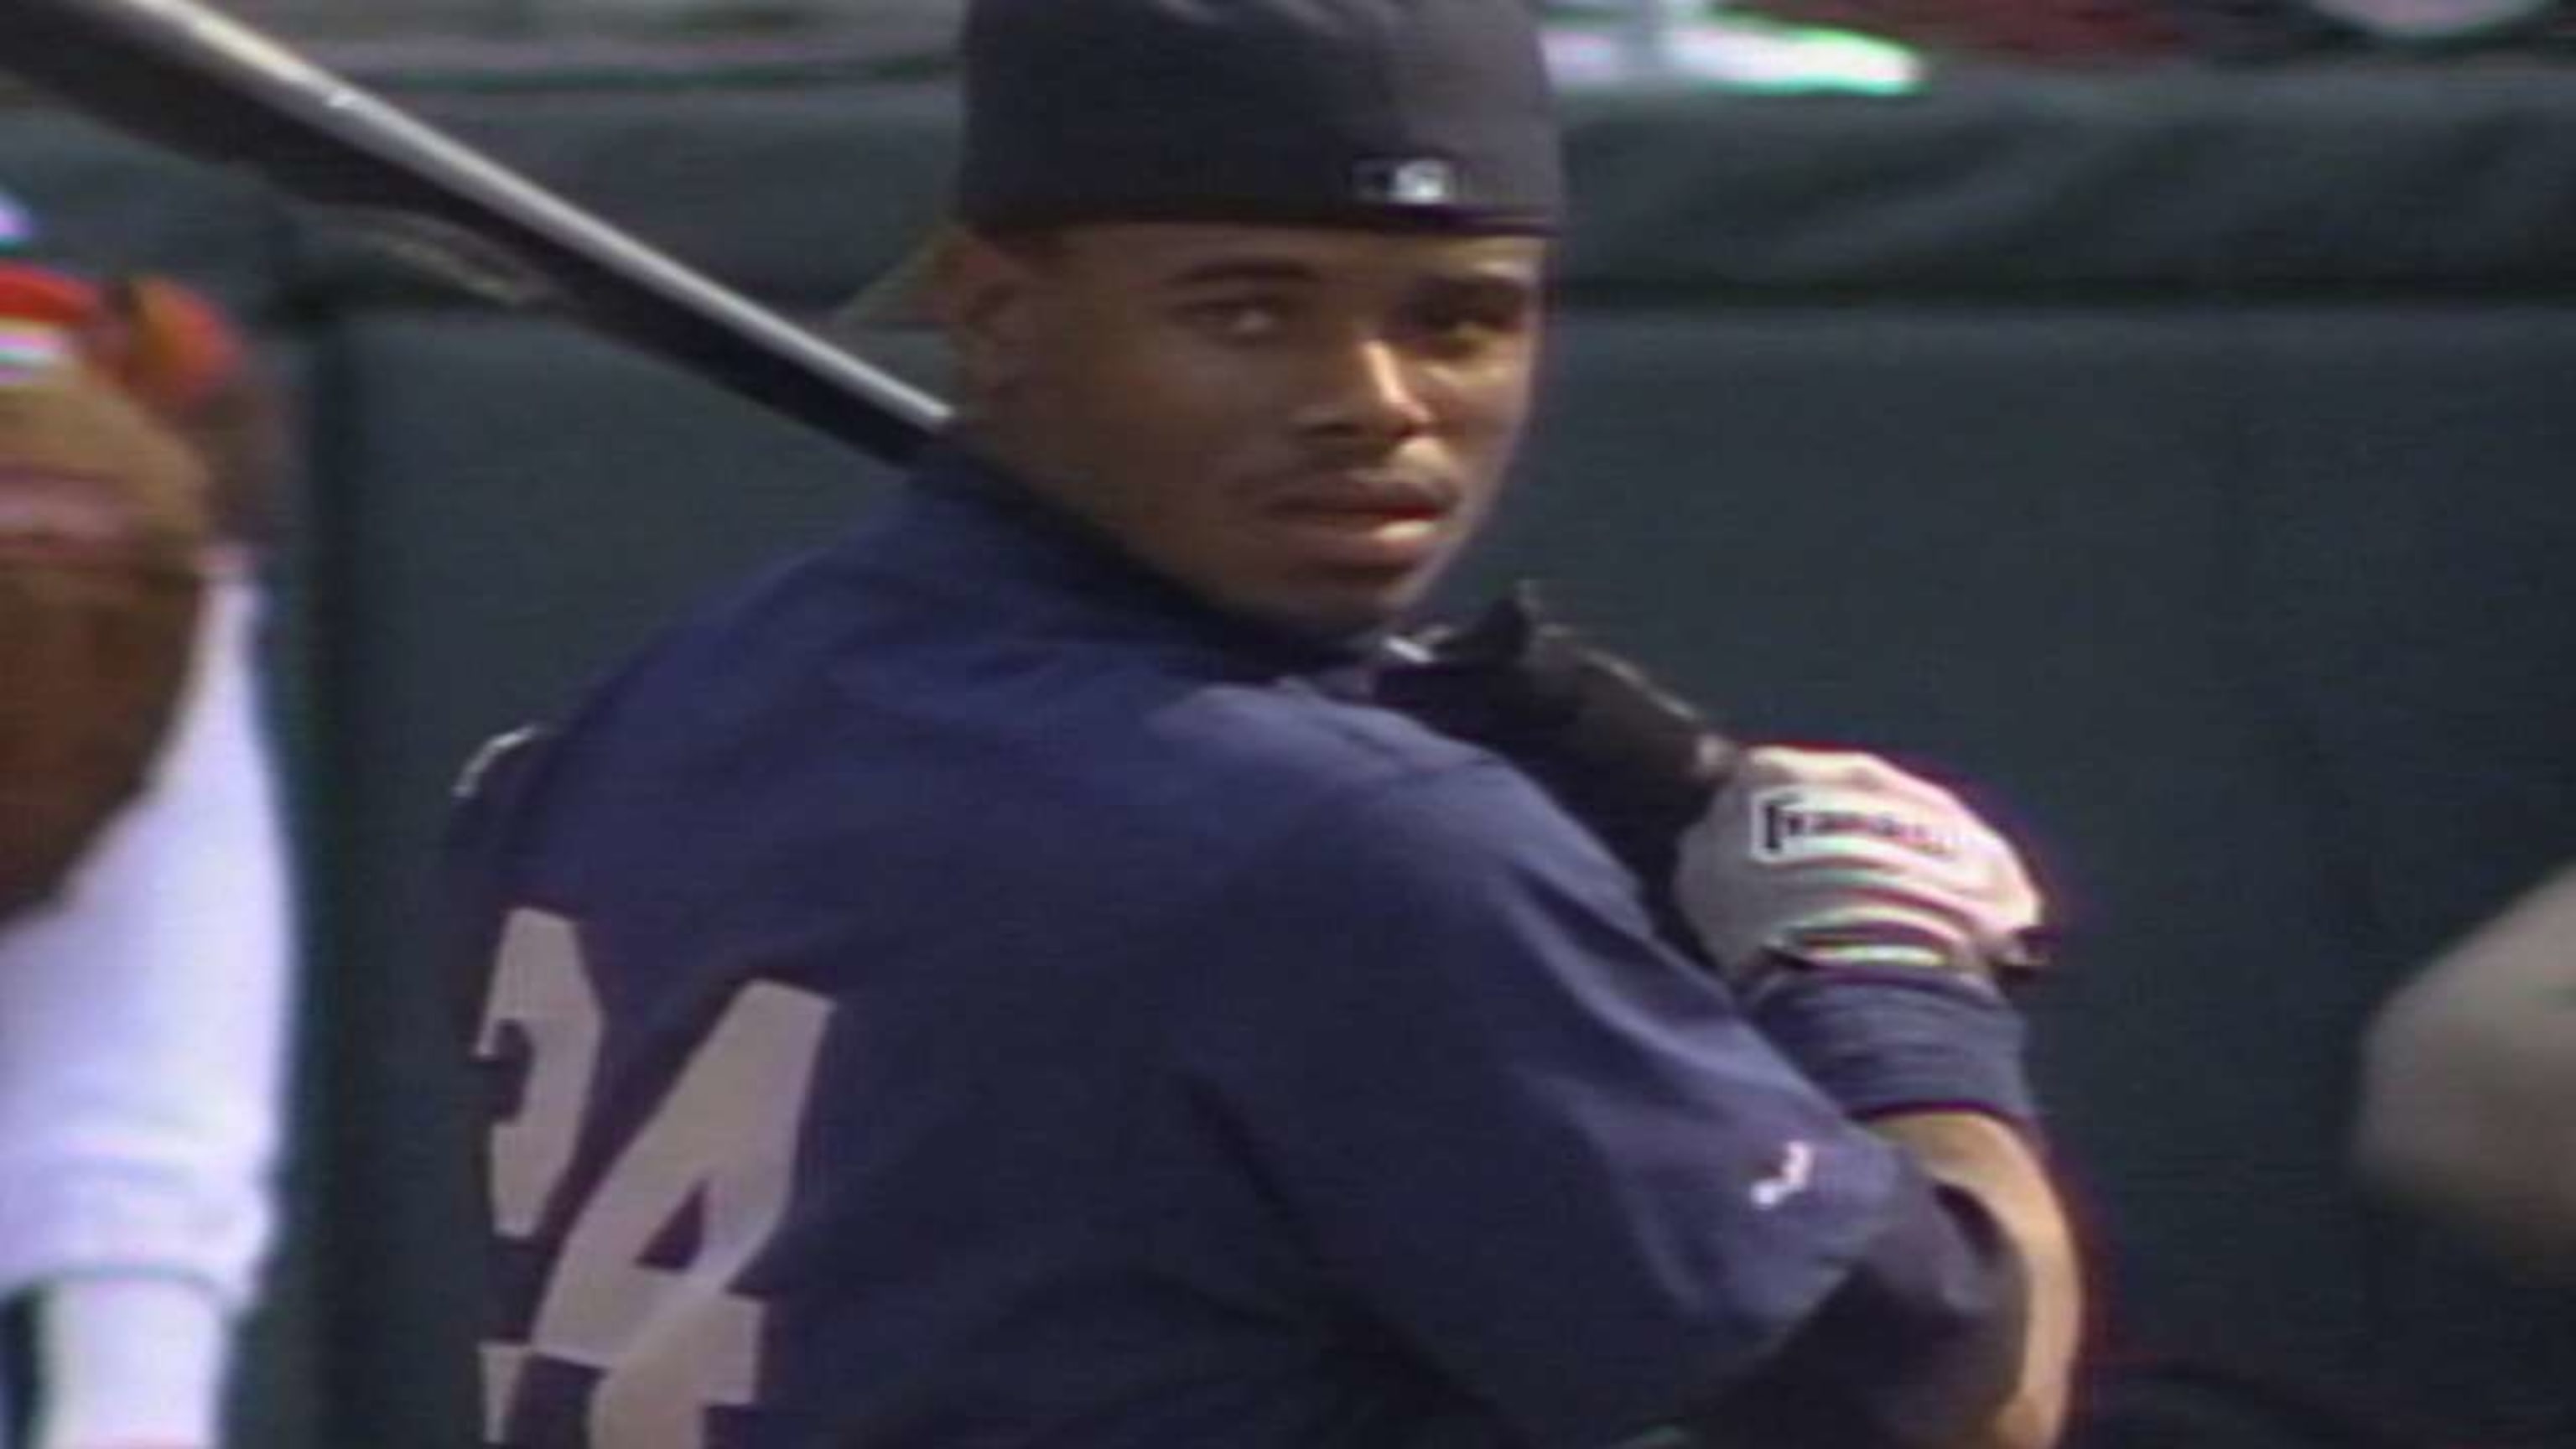 Home Run Derby hero Ken Griffey Jr. is still the only player to